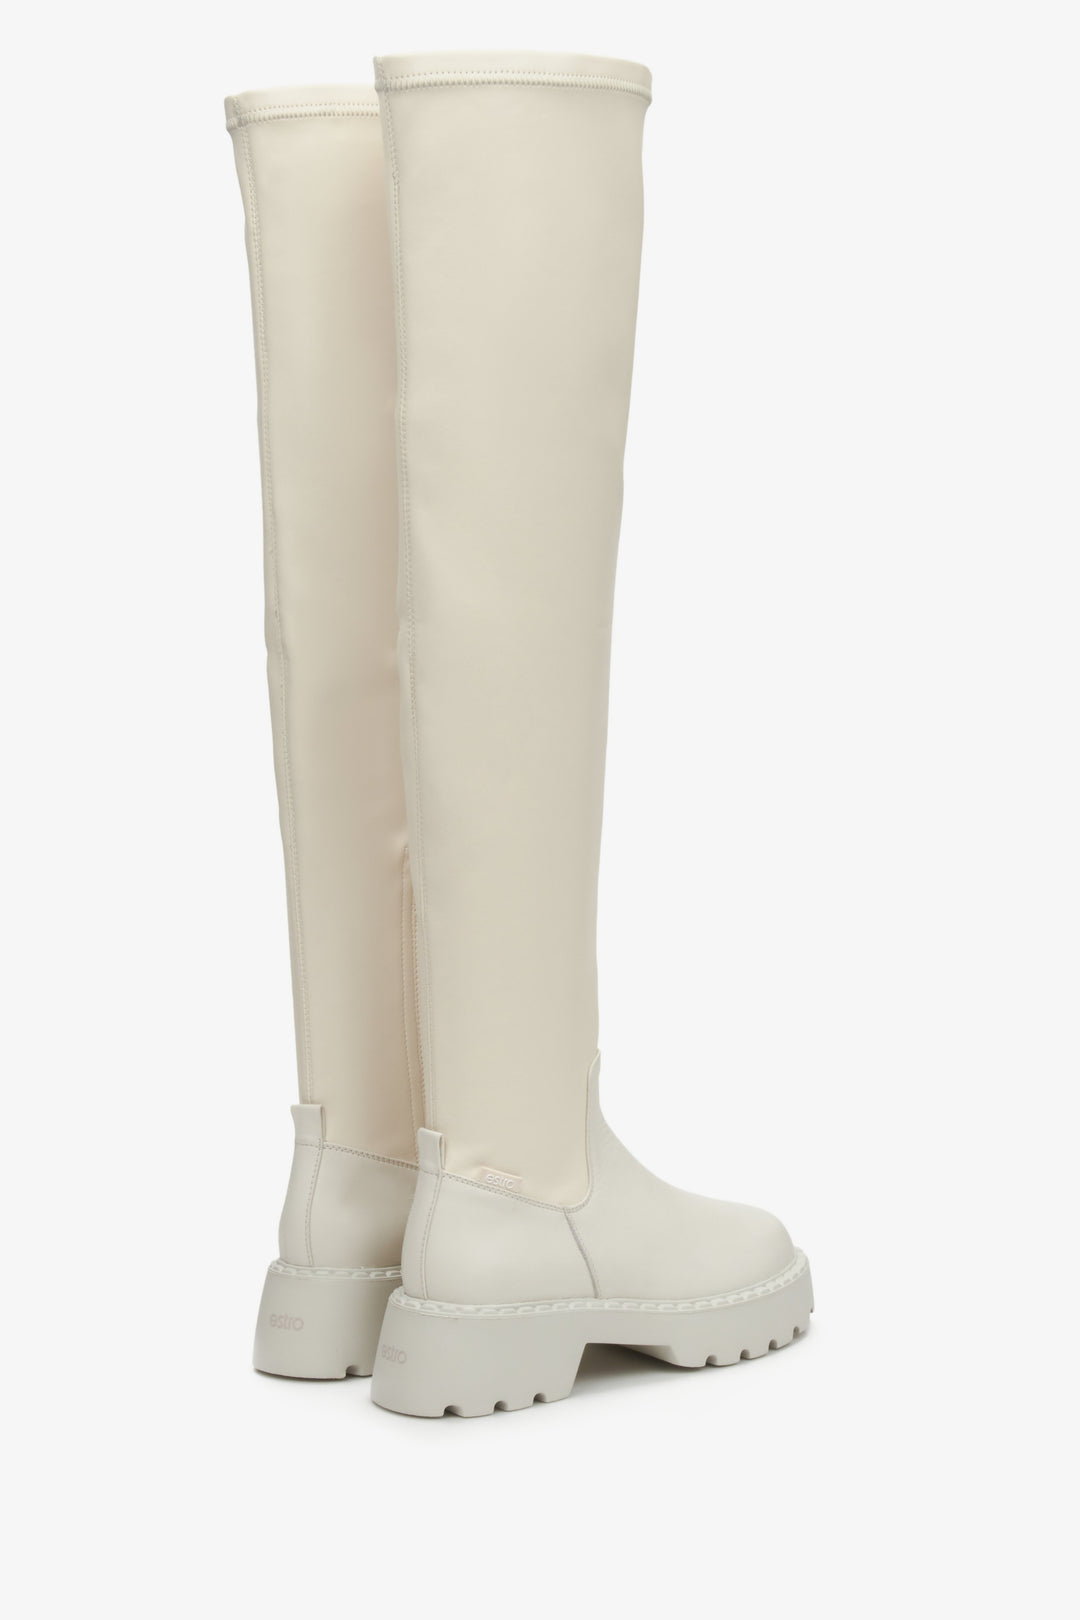 Women's  light beige knee high  Estro boots - close-up of the side and back of the shoes.